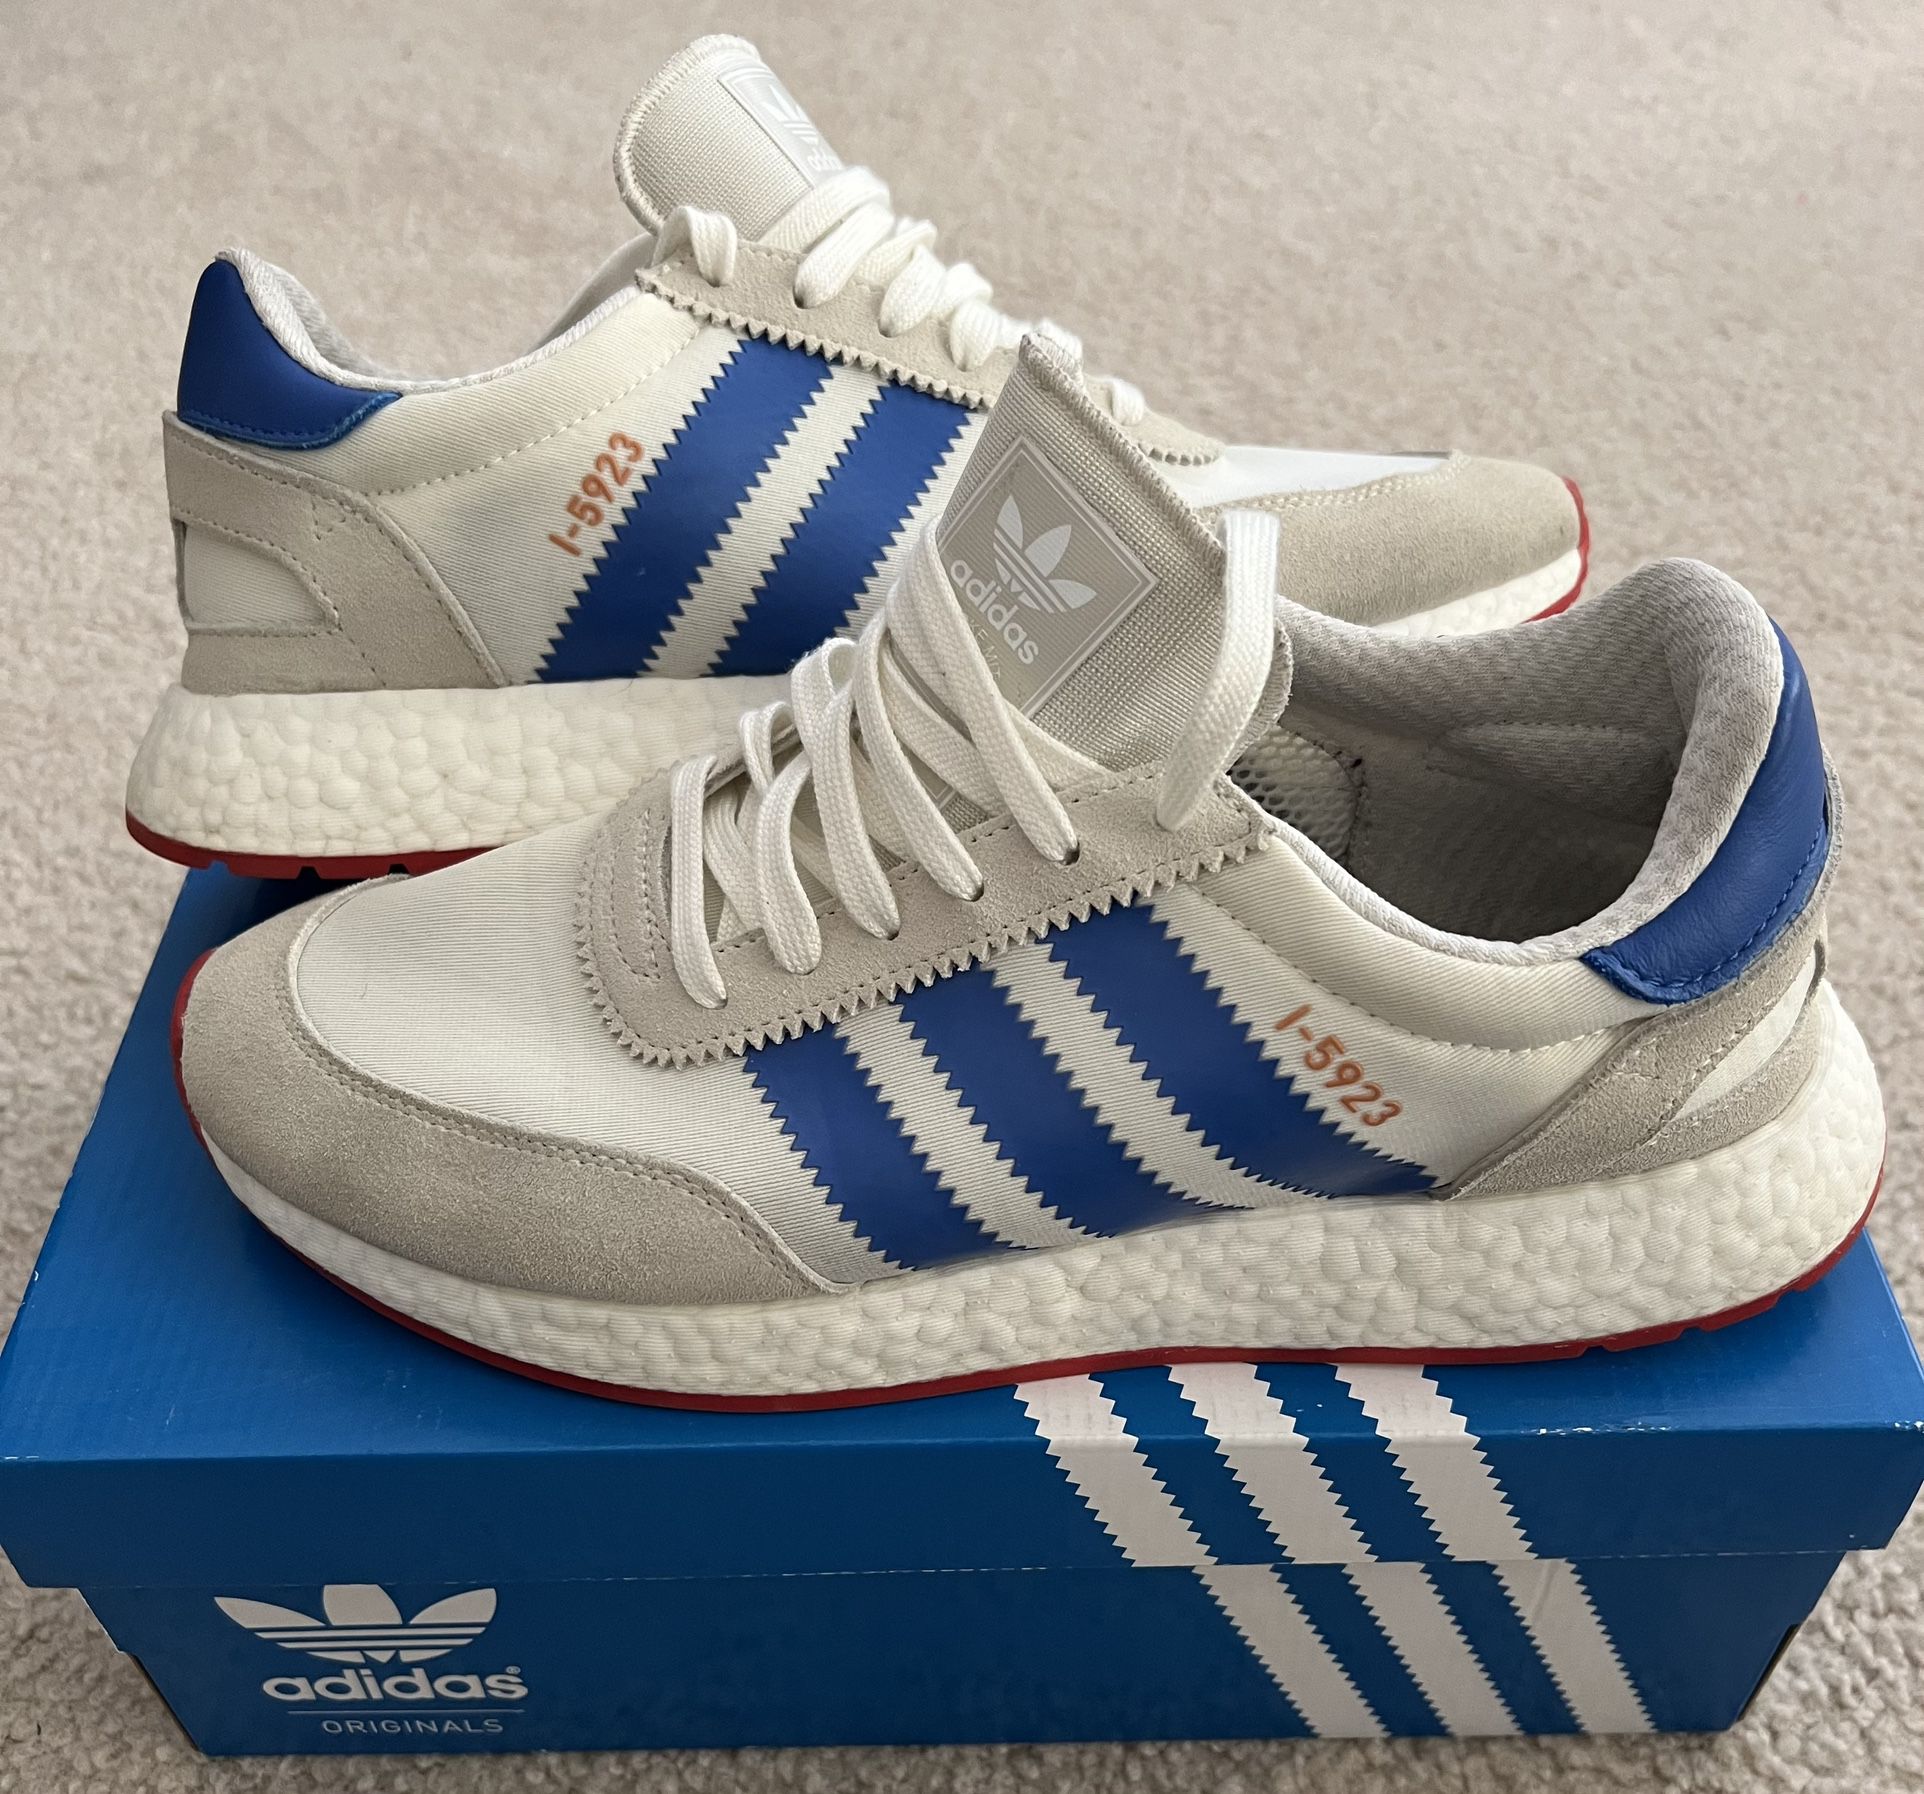 Adidas Iniki Boost Runner Mens Size 9.5 for Sale CA OfferUp